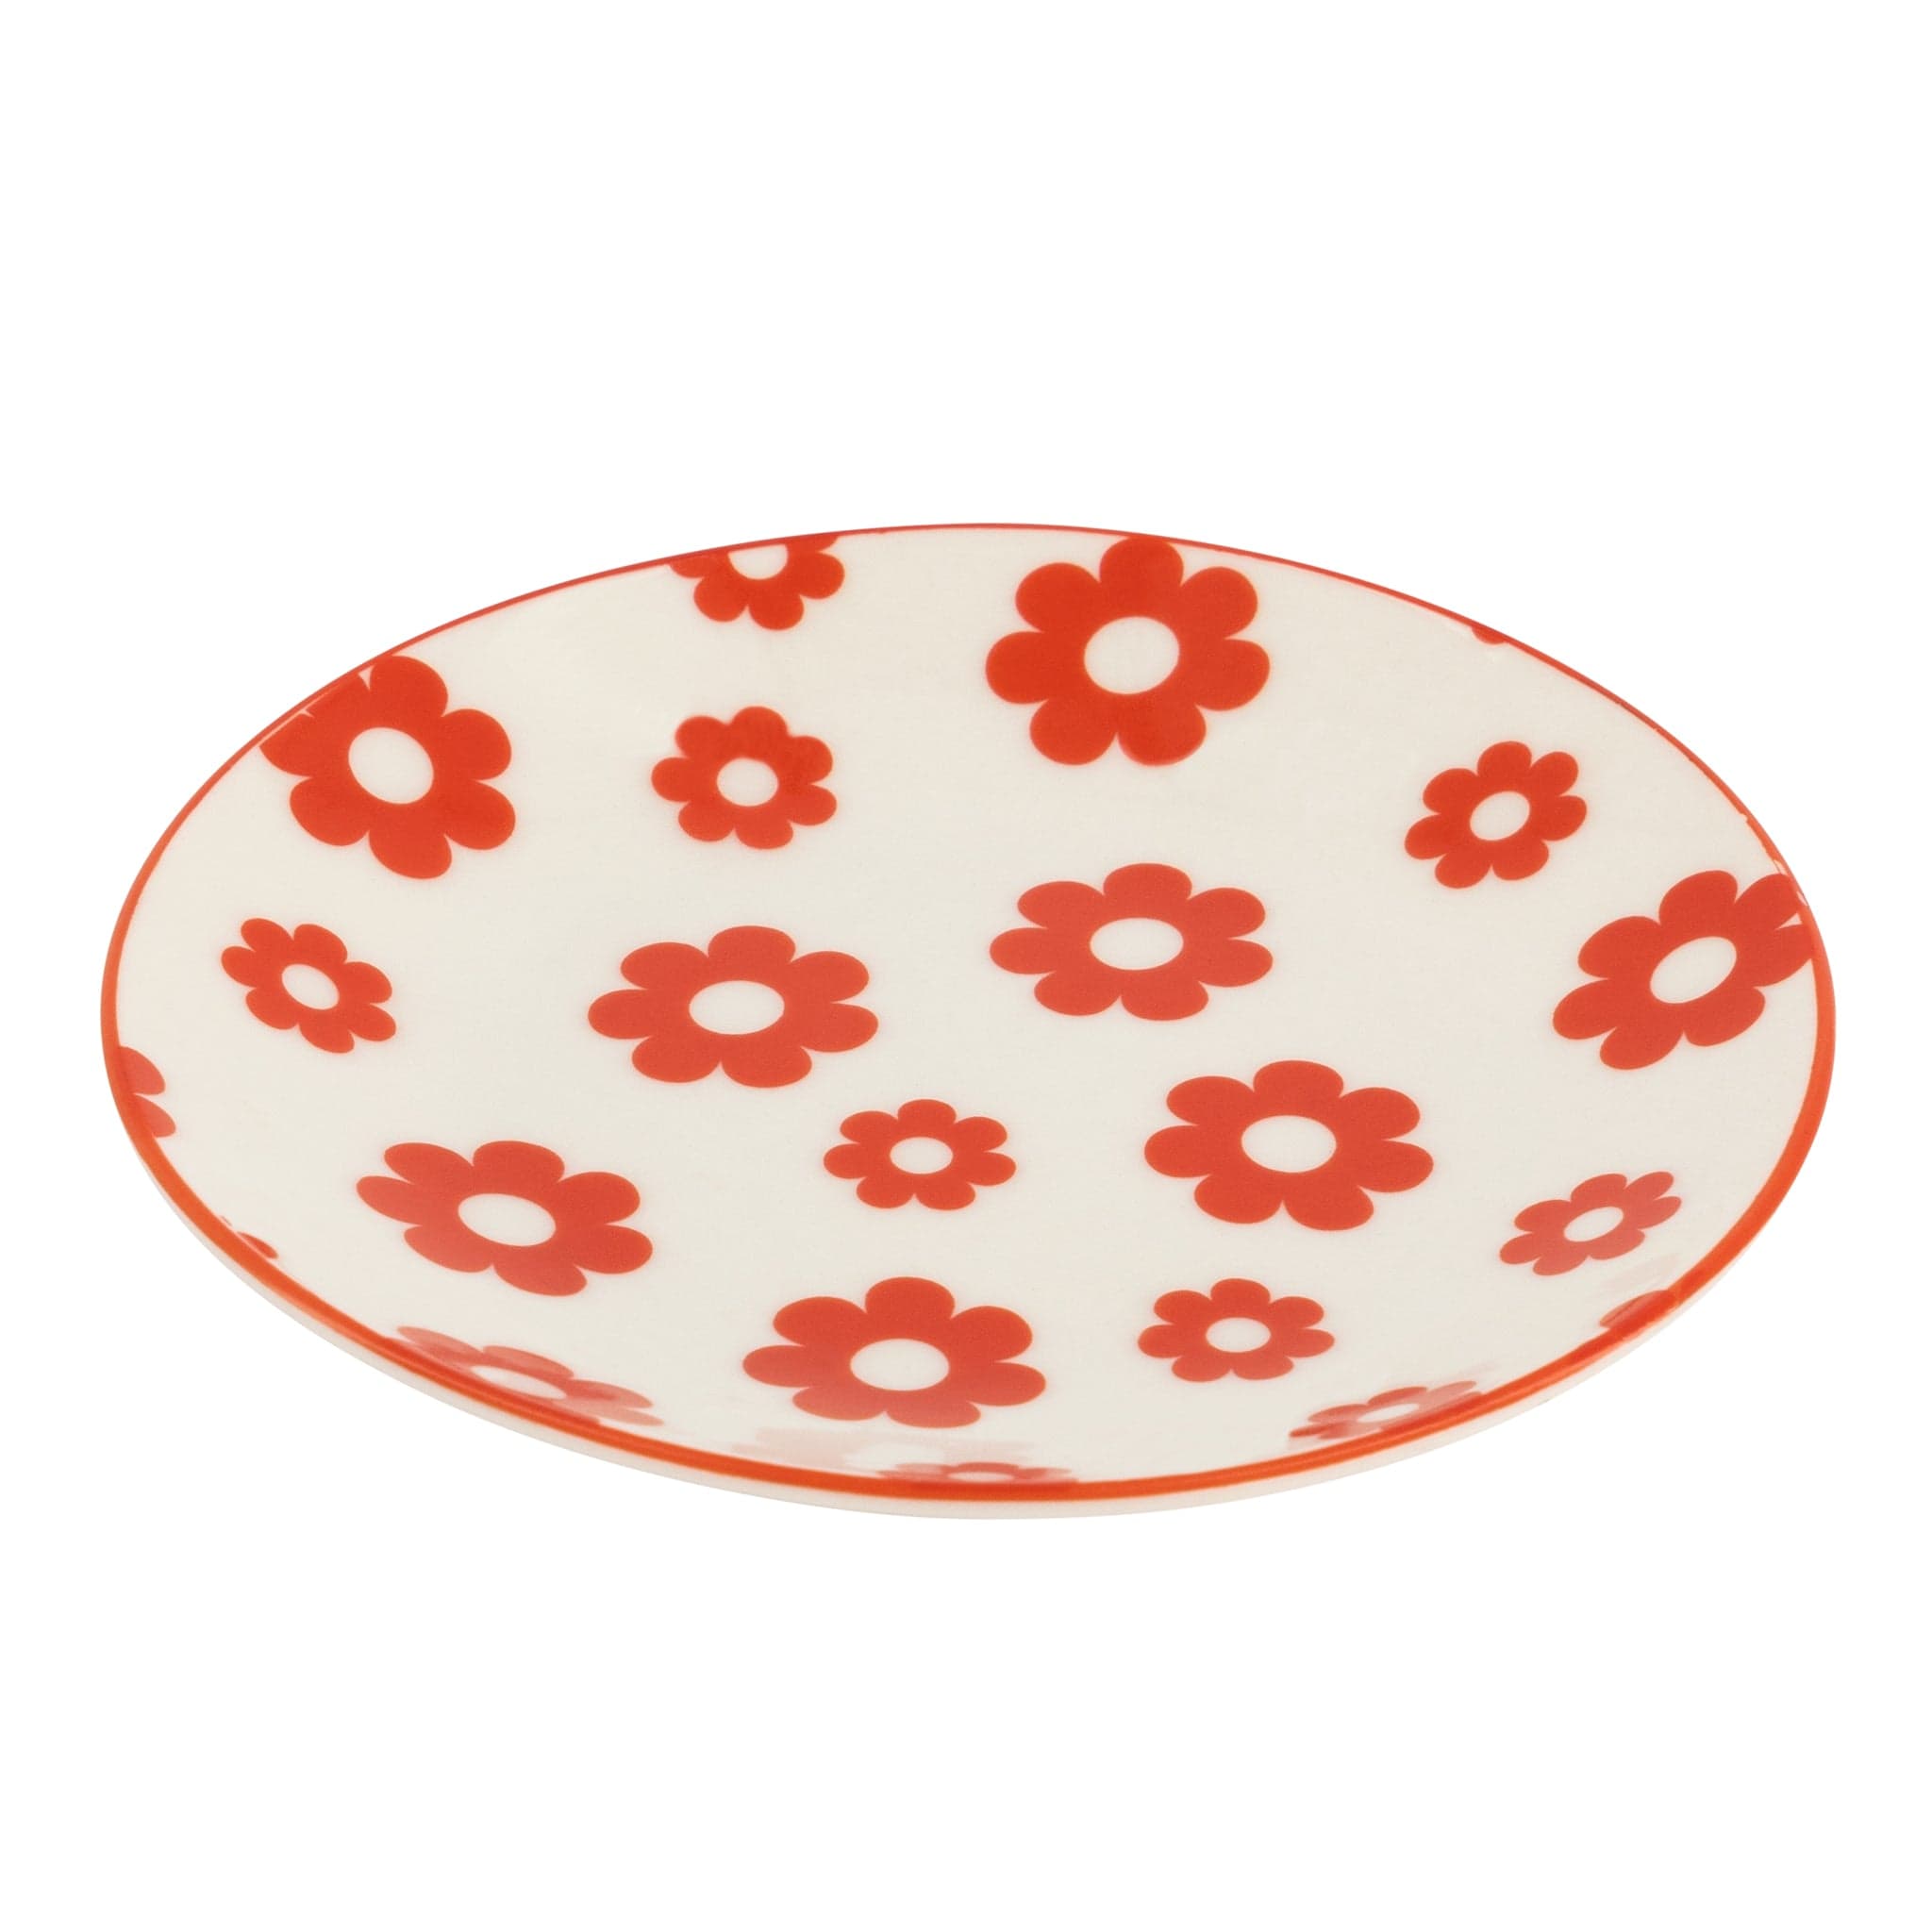 New Bone China Printed 12cm Plate - Red Flowers 6926101889709 only5pounds-com